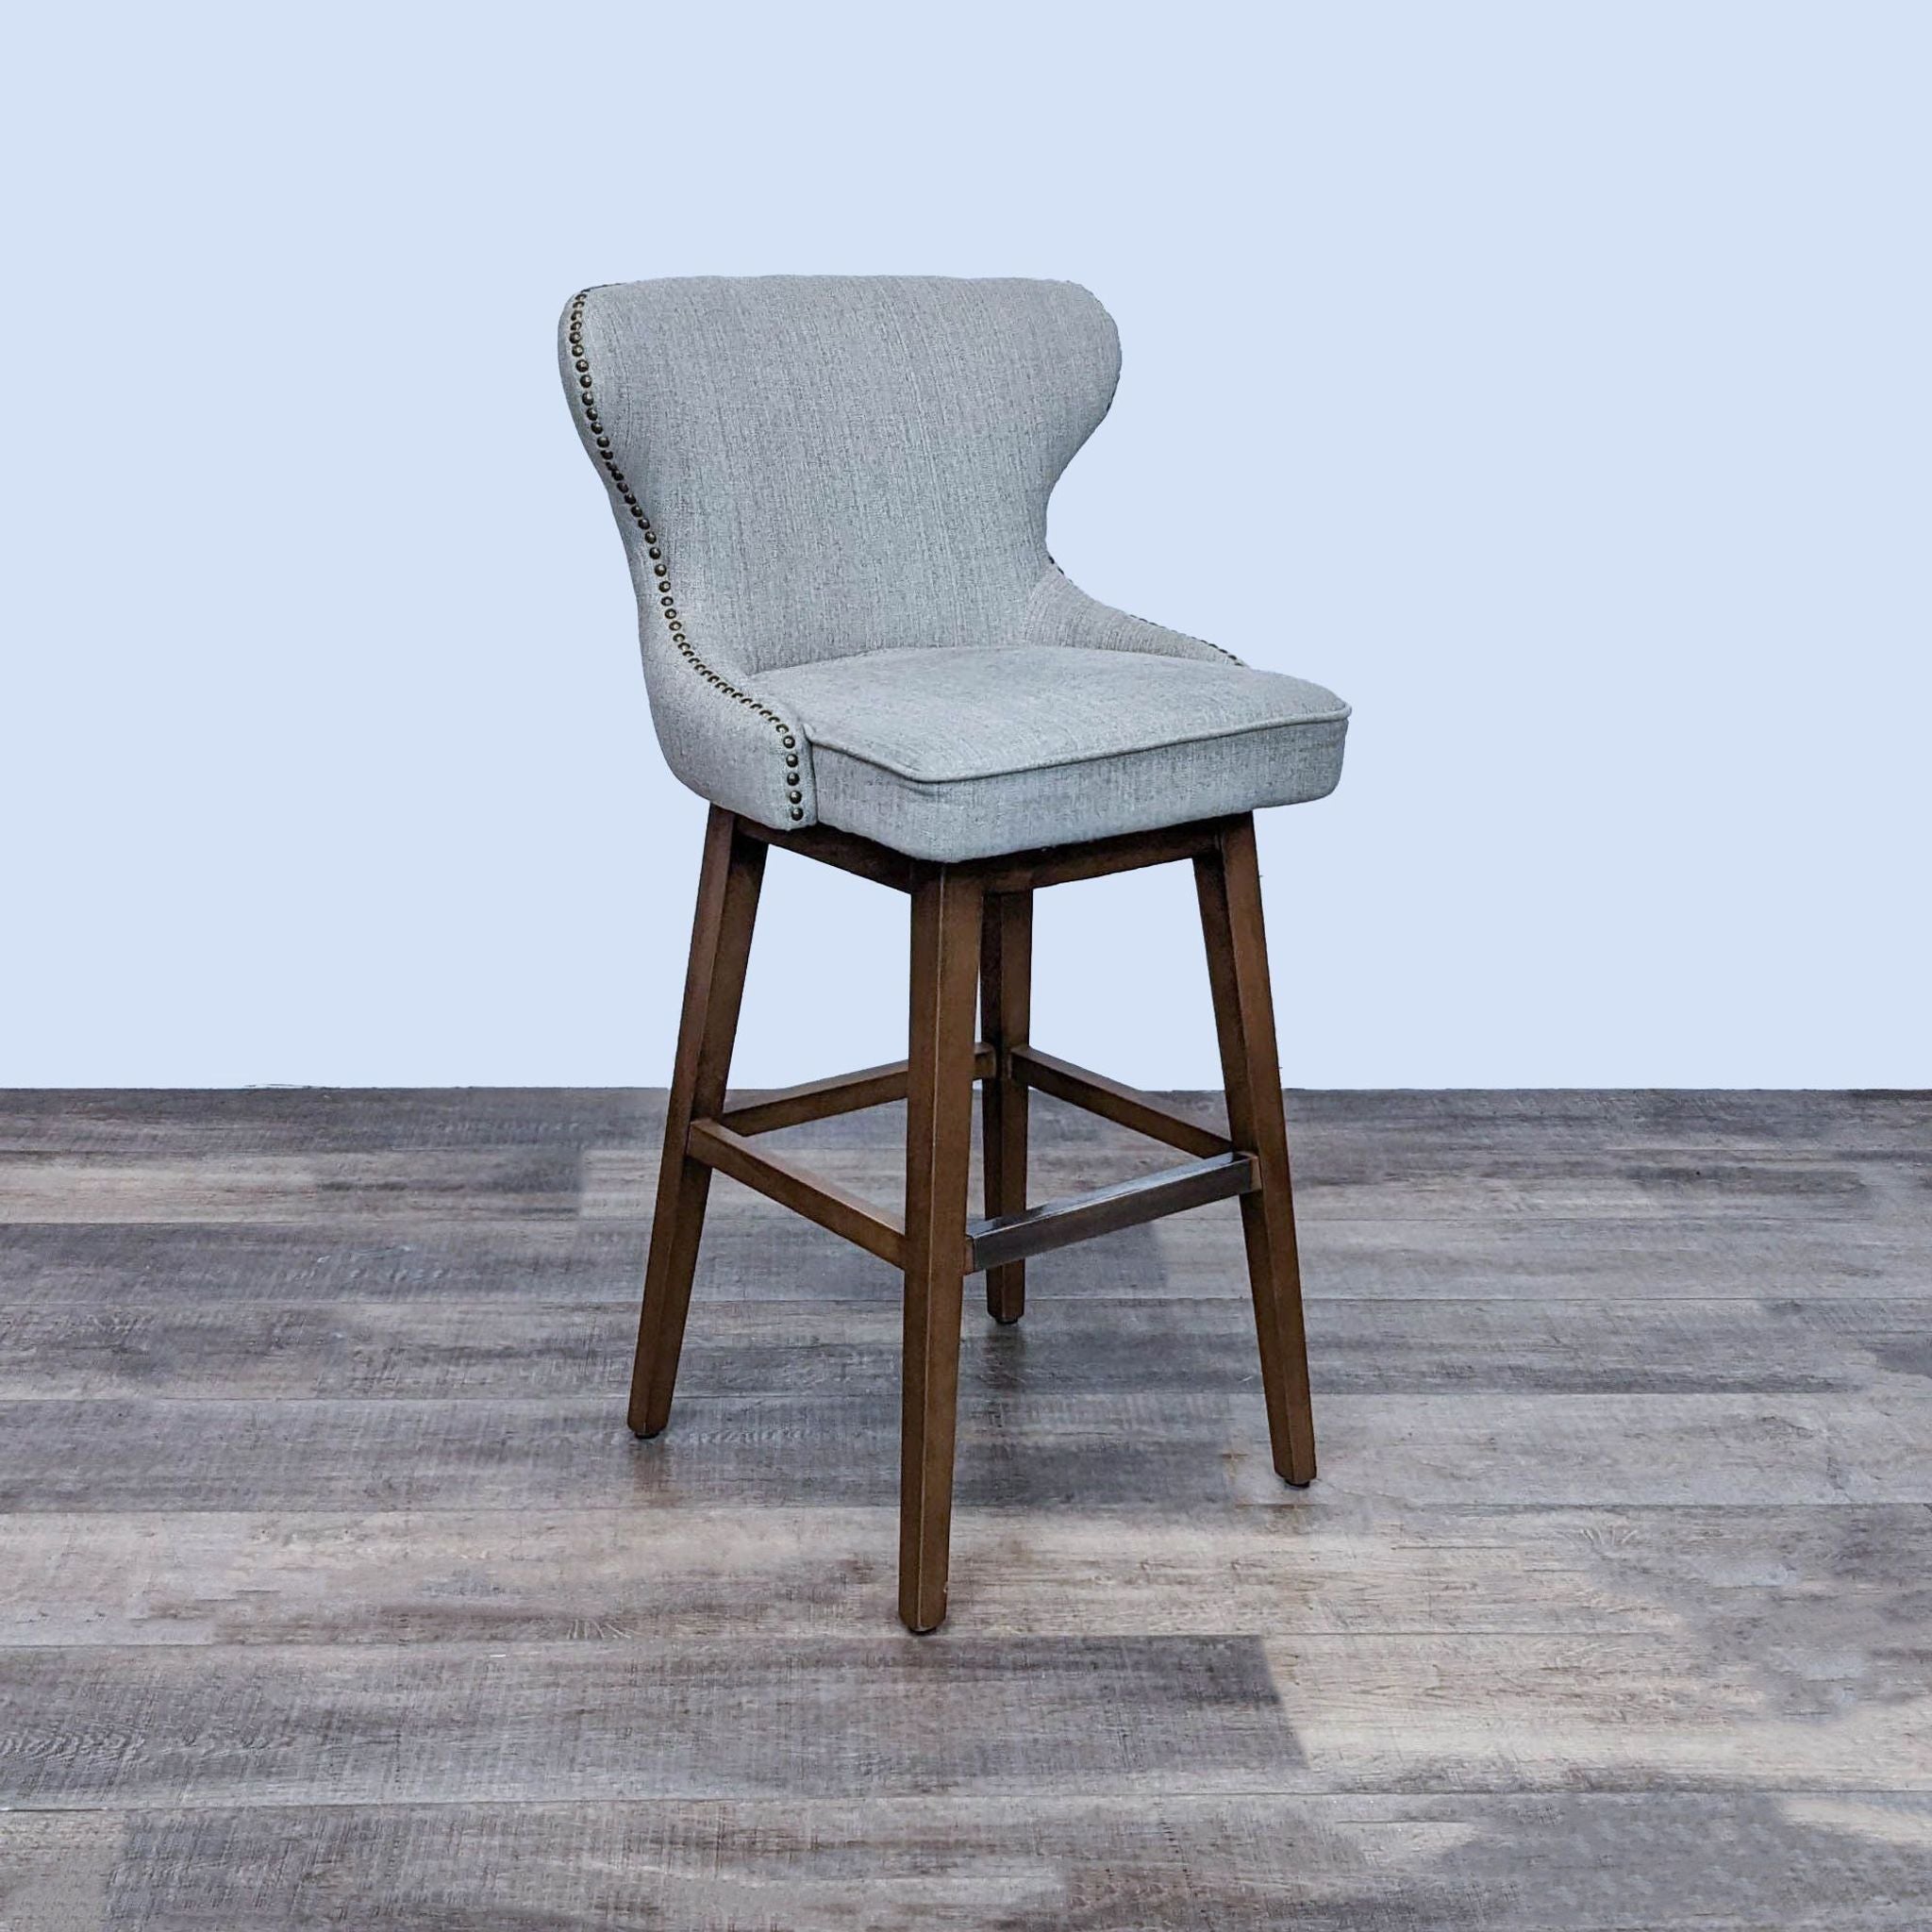 Neutral-colored fabric bar stool with tufted back and nailhead details on a solid wood frame, by Reperch, rear view.